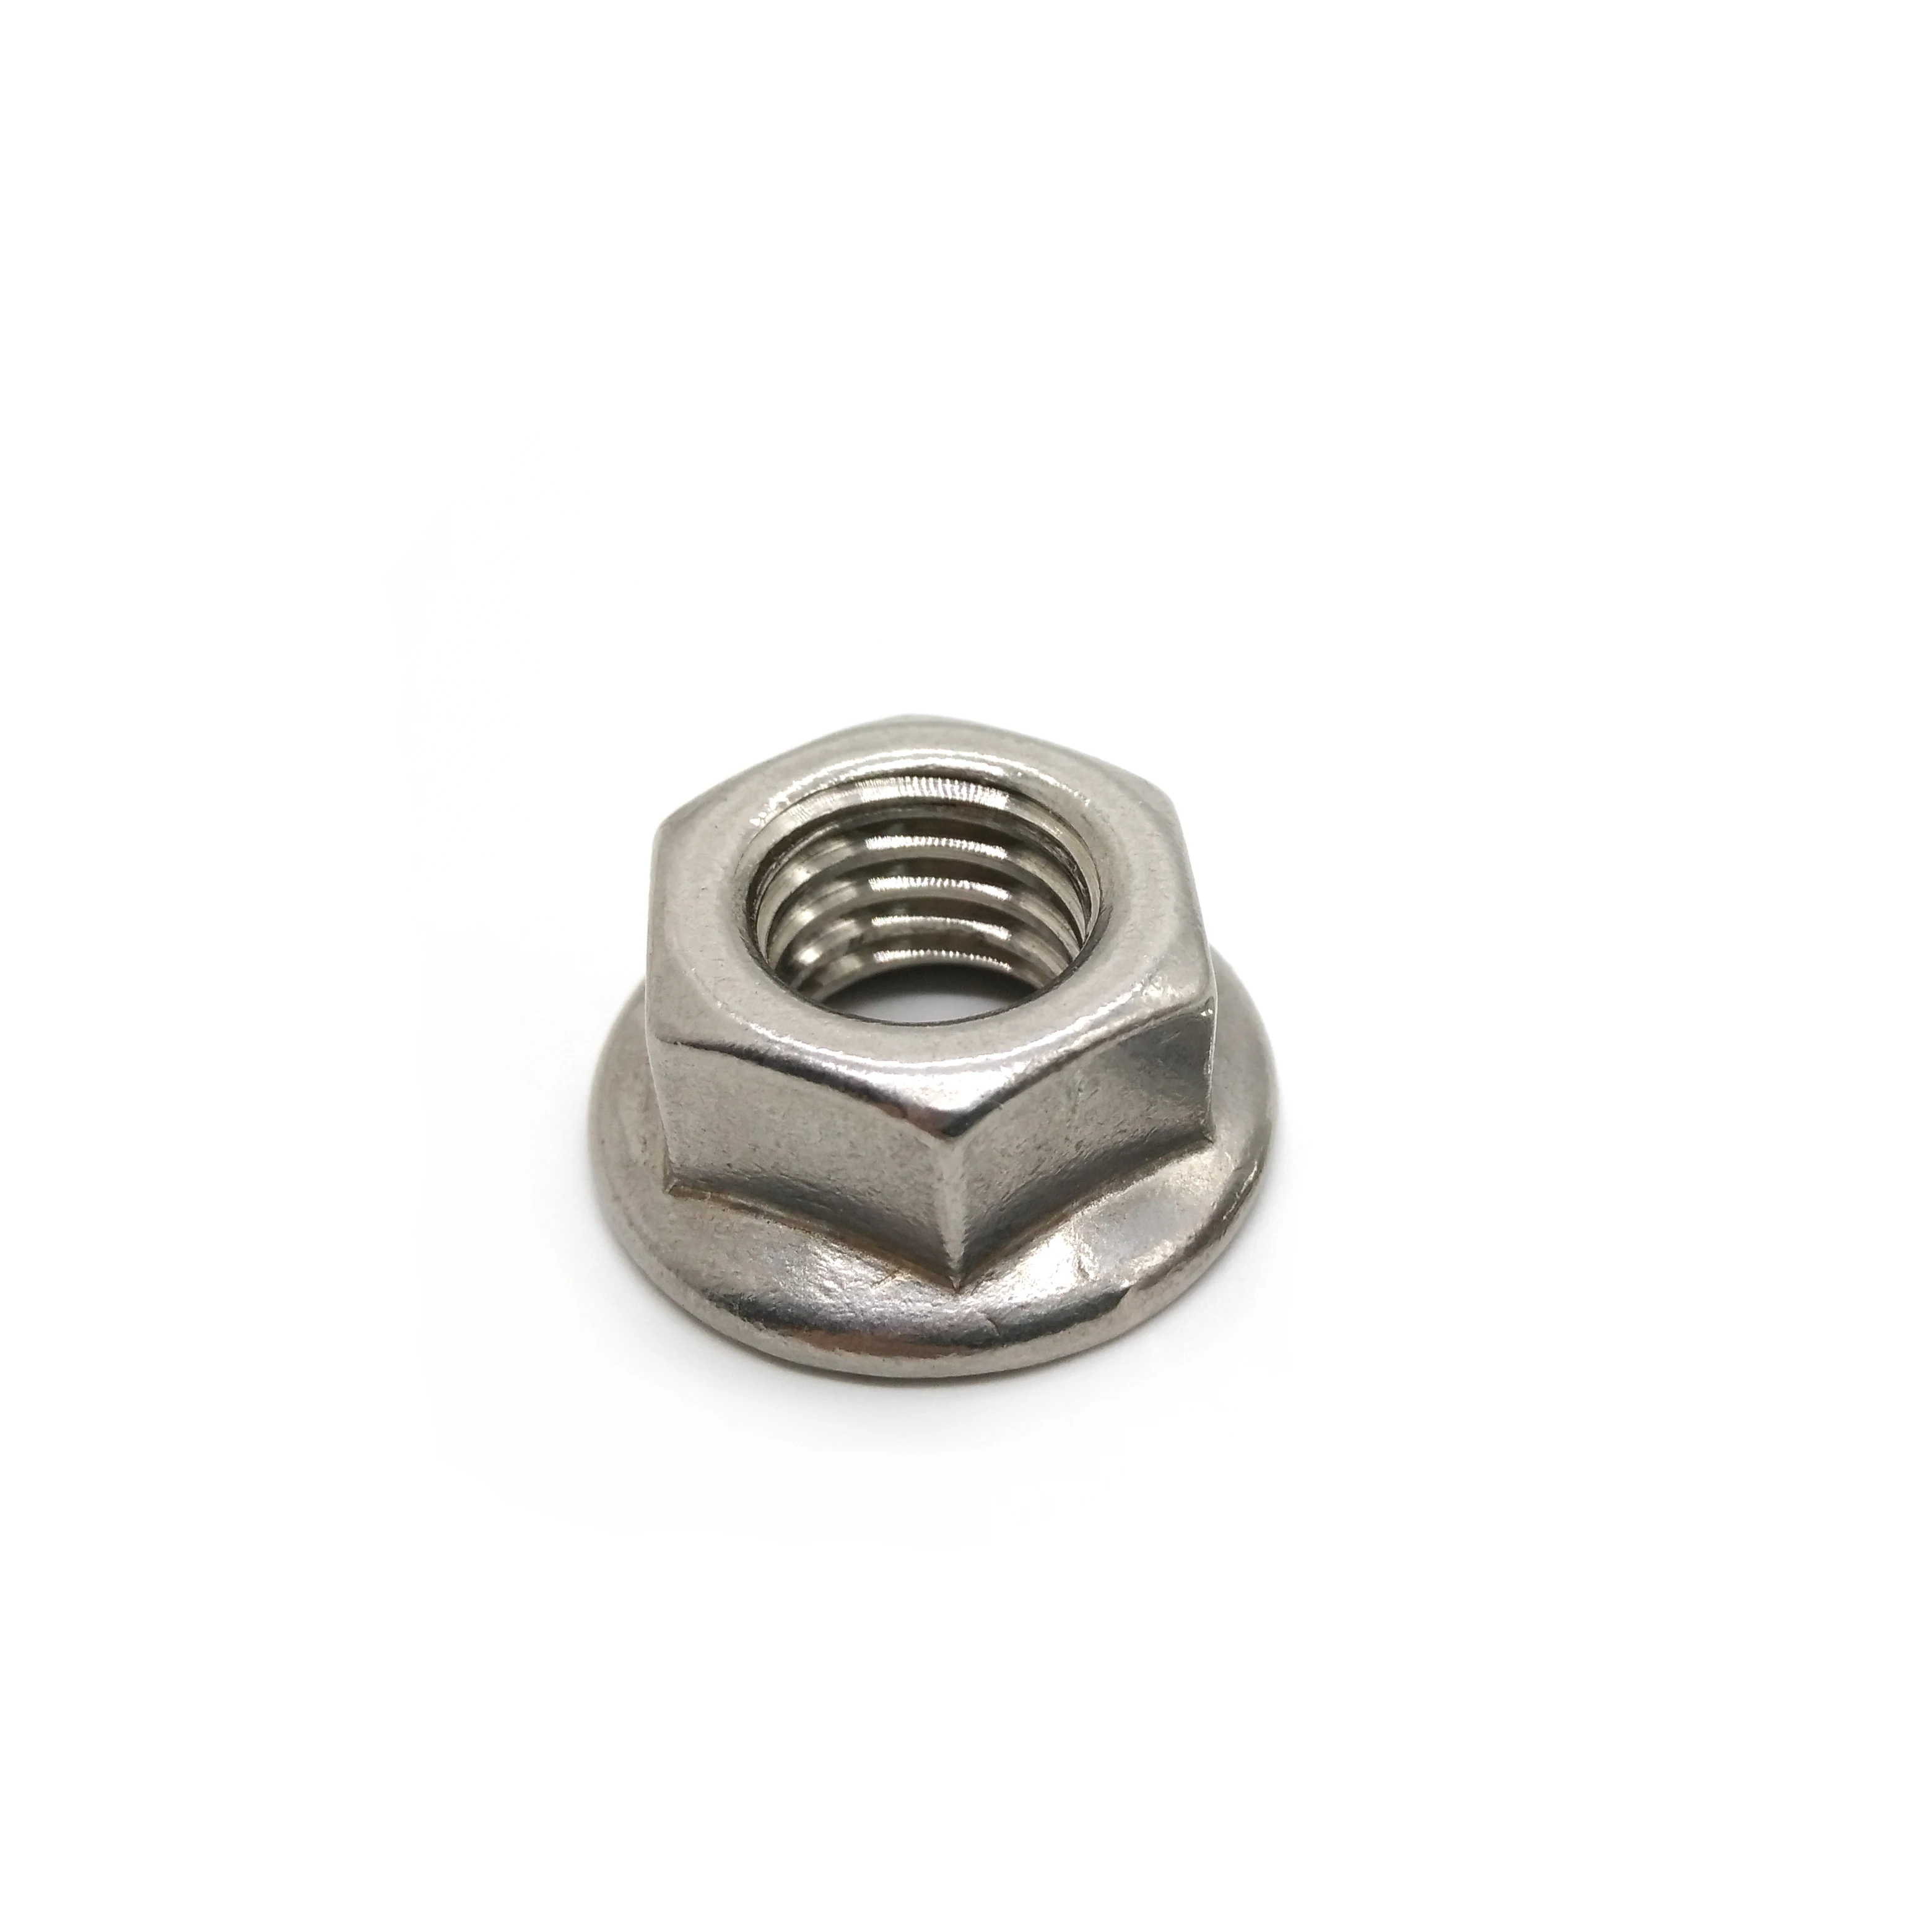 Hex Lock Nut With Flange DIN6923 Nylock Nuts Stainless Steel A2/A4 M3 To M12 